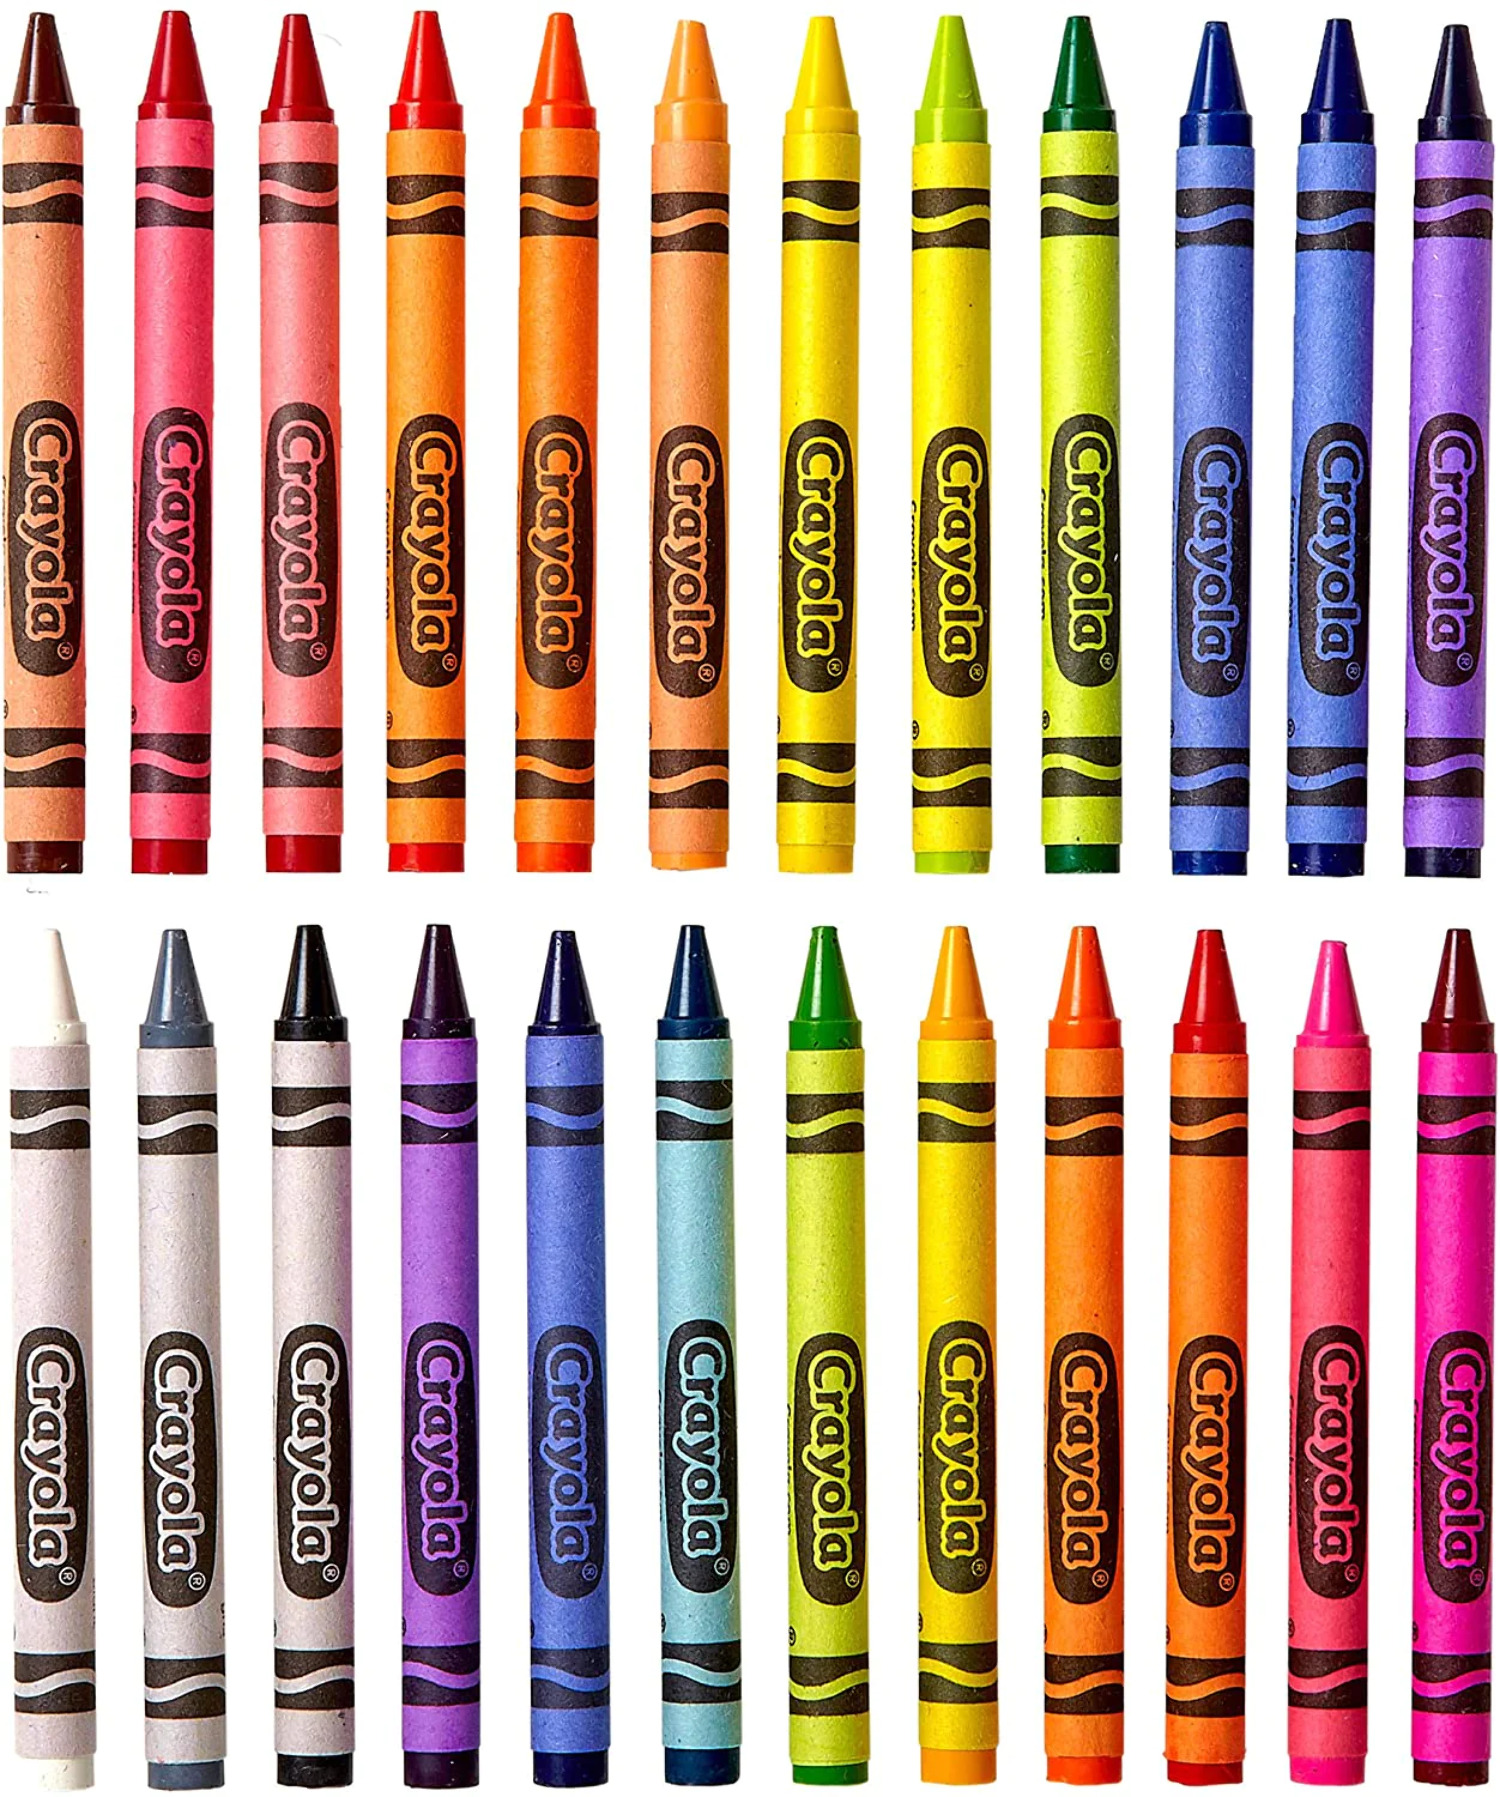 Crayola Classic Crayons, Assorted Colors, Back to School, 24 Count - image 3 of 6